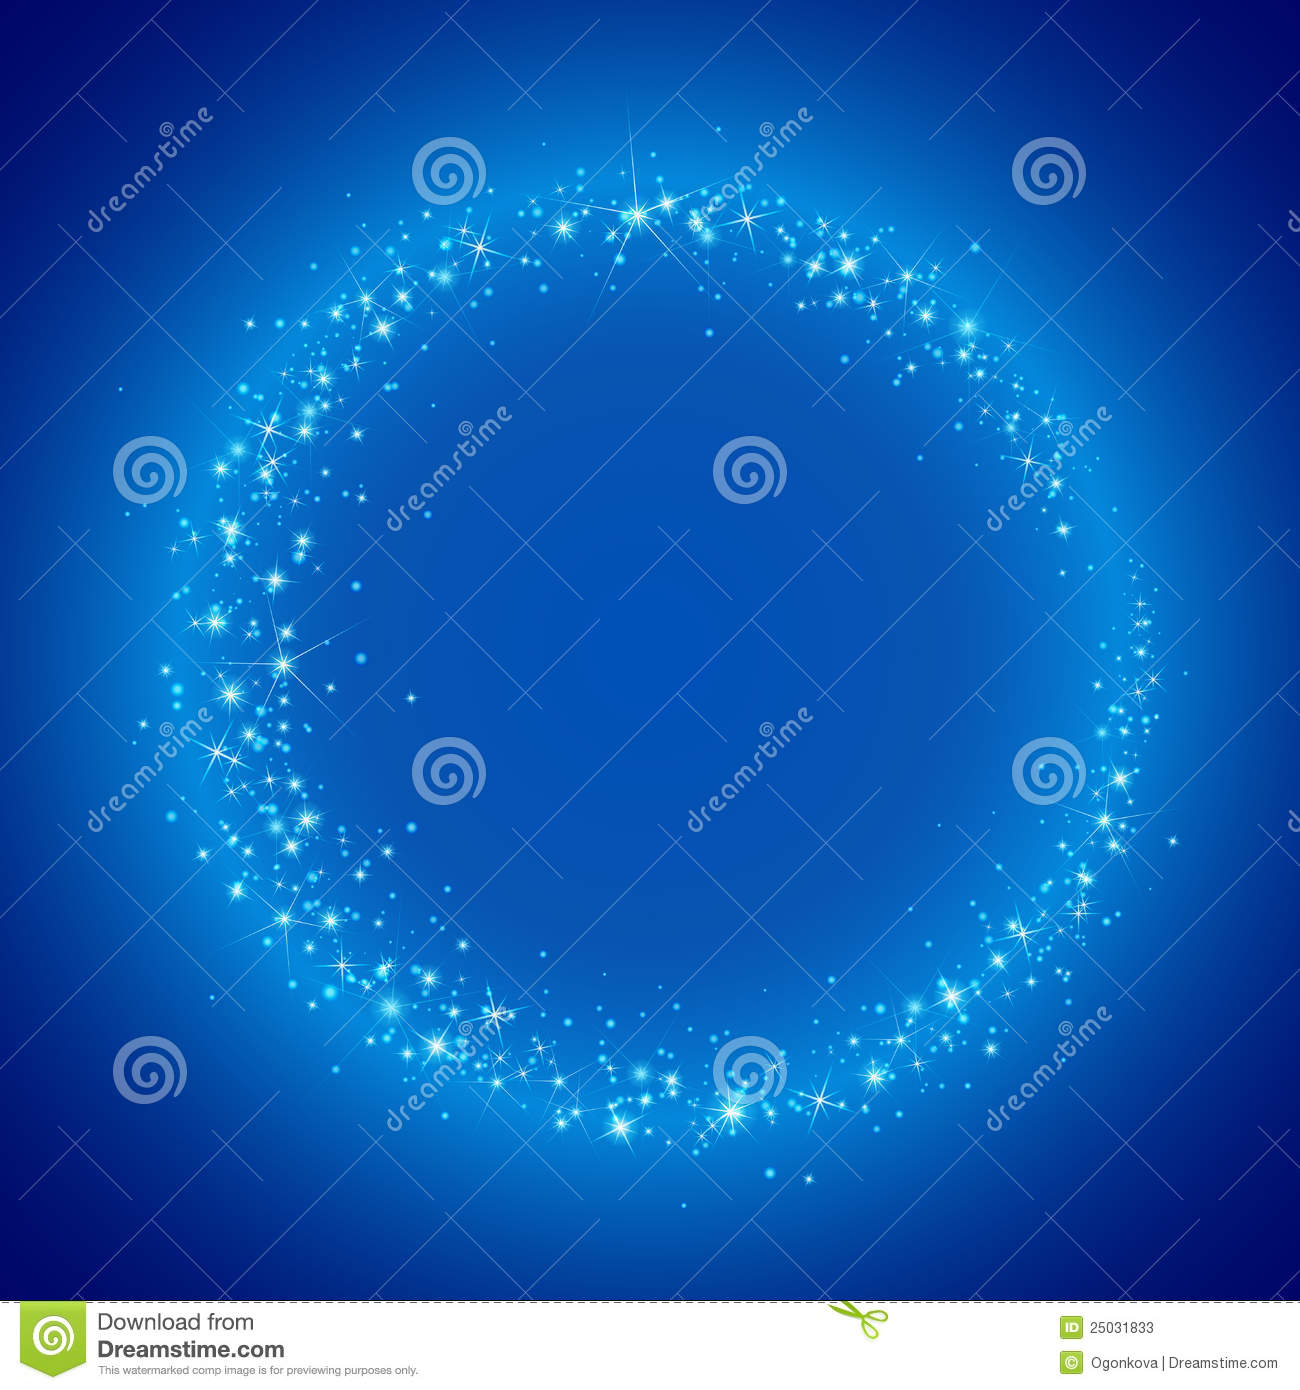 A Blue Circle with Stars